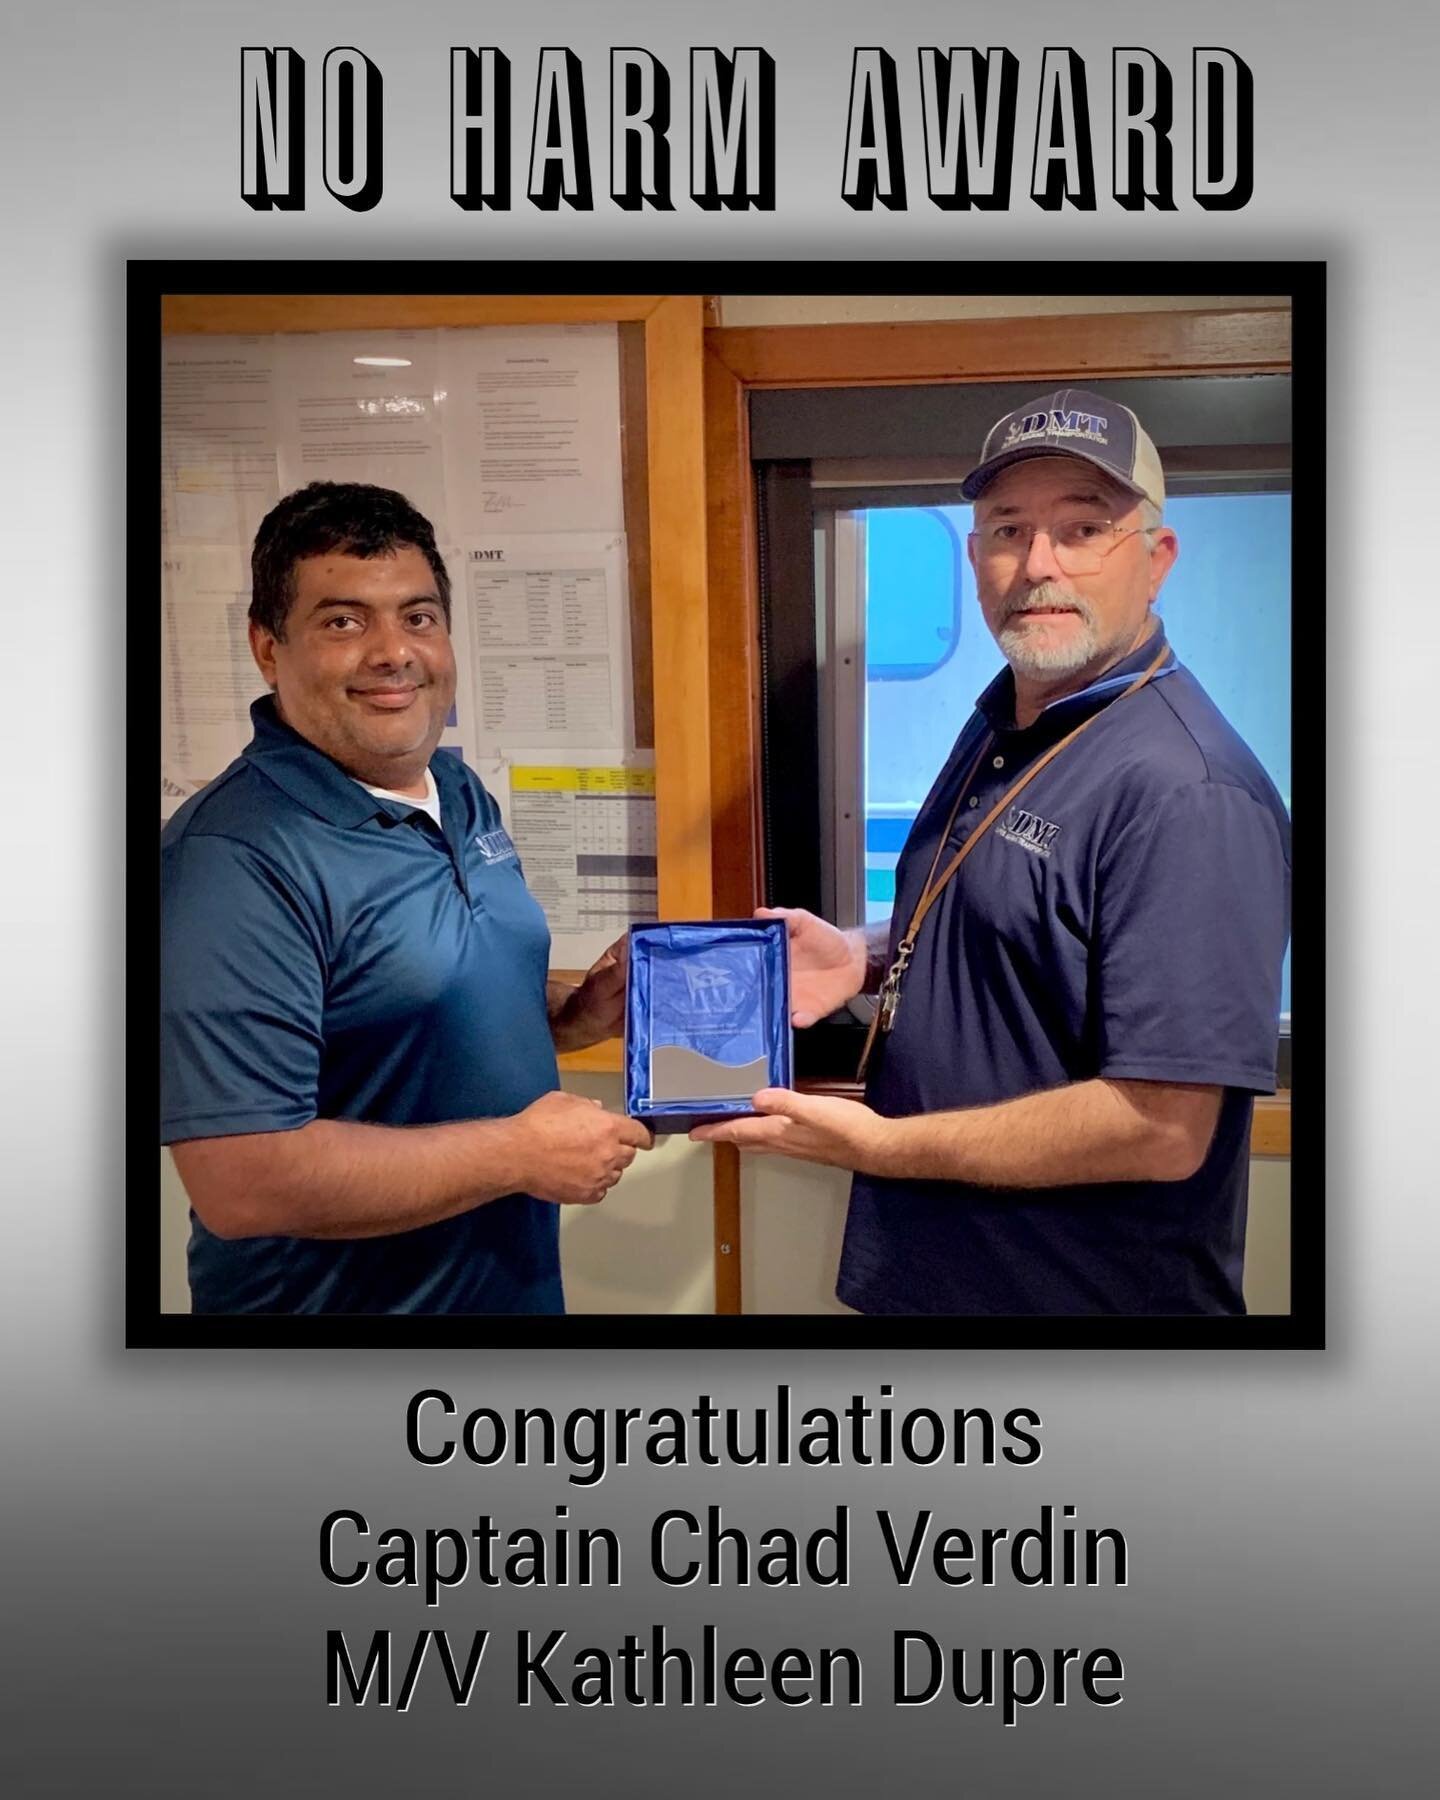 Another special congratulations to Captain Chad Verdin @chadverdin for his Kirby Inland Marine NO HARM AWARD for your Stop Work Responsibility!! Adding to their many awards and always staying safe!!
🌟⛴⚓️🌟
Port Captain Frank Bumgarden presenting Cap